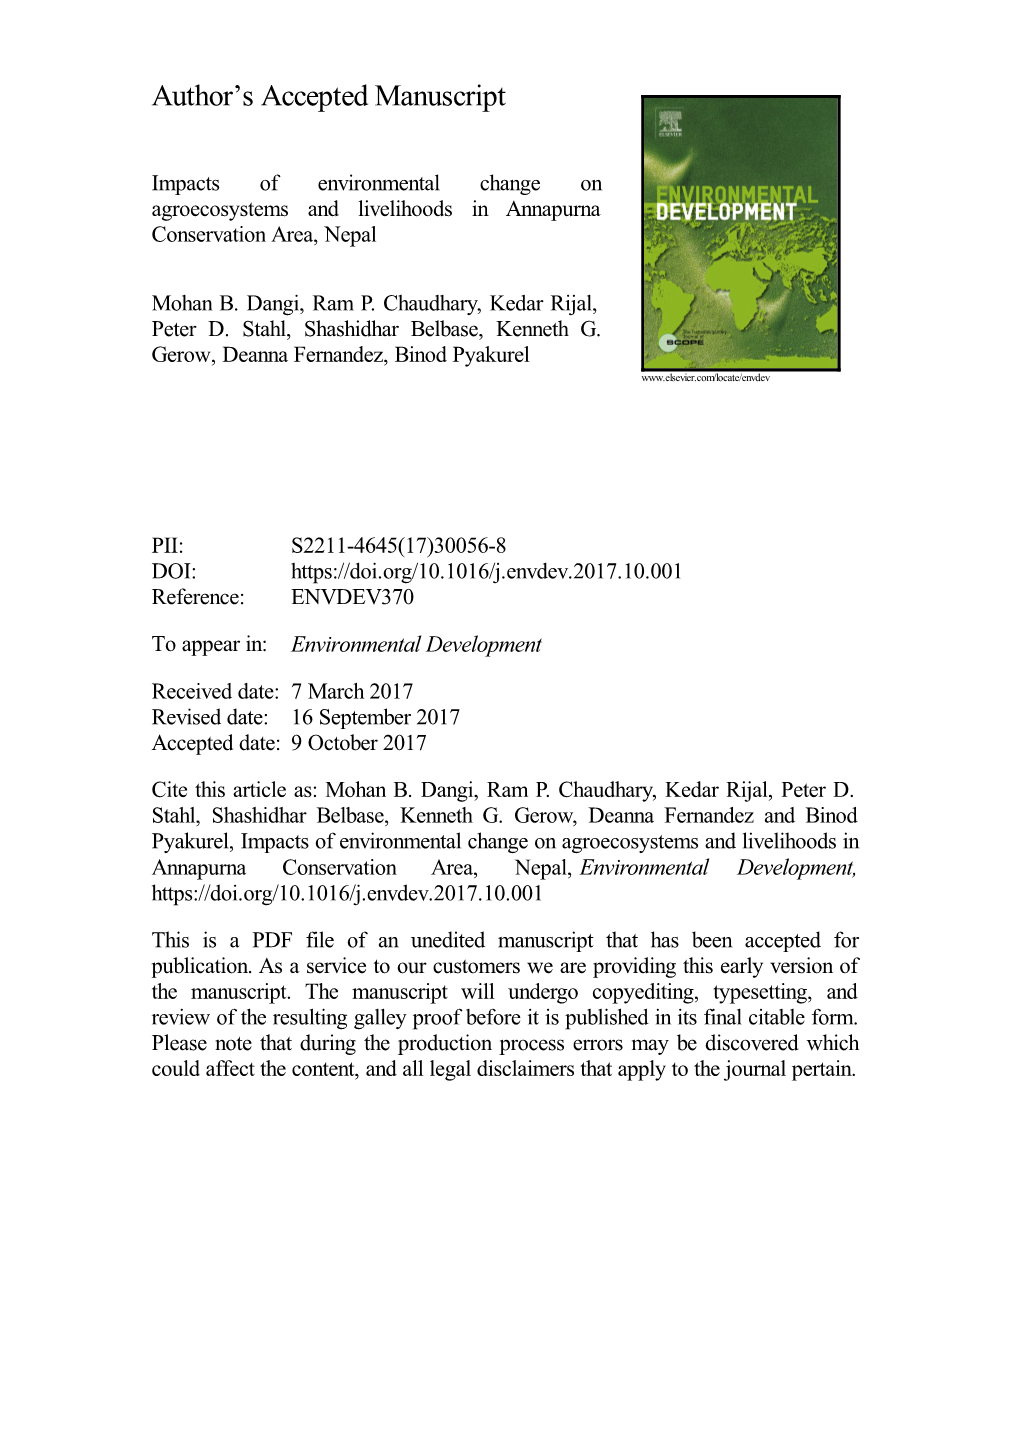 Impacts of Environmental Change on Agroecosystems and Livelihoods in Annapurna Conservation Area, Nepal